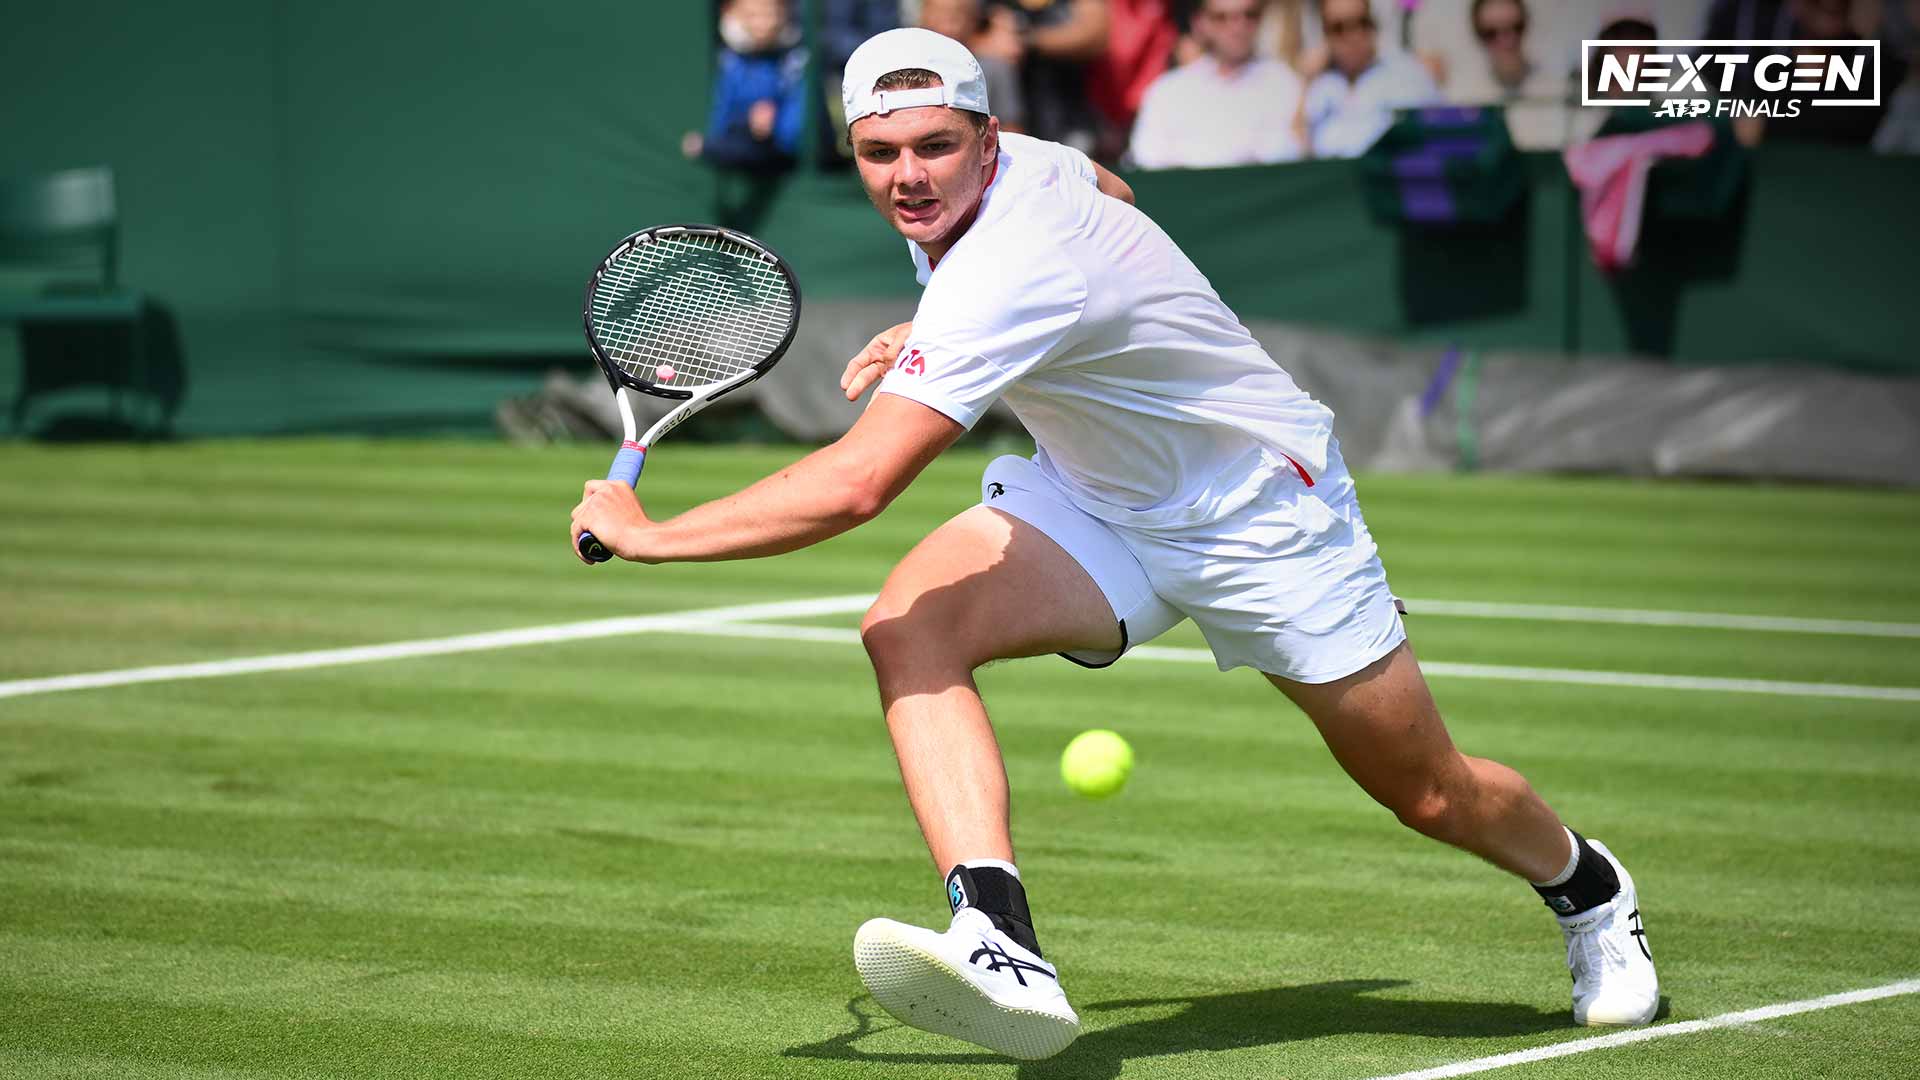 Dominic Stricker earned his first major win on Wednesday at Wimbledon.